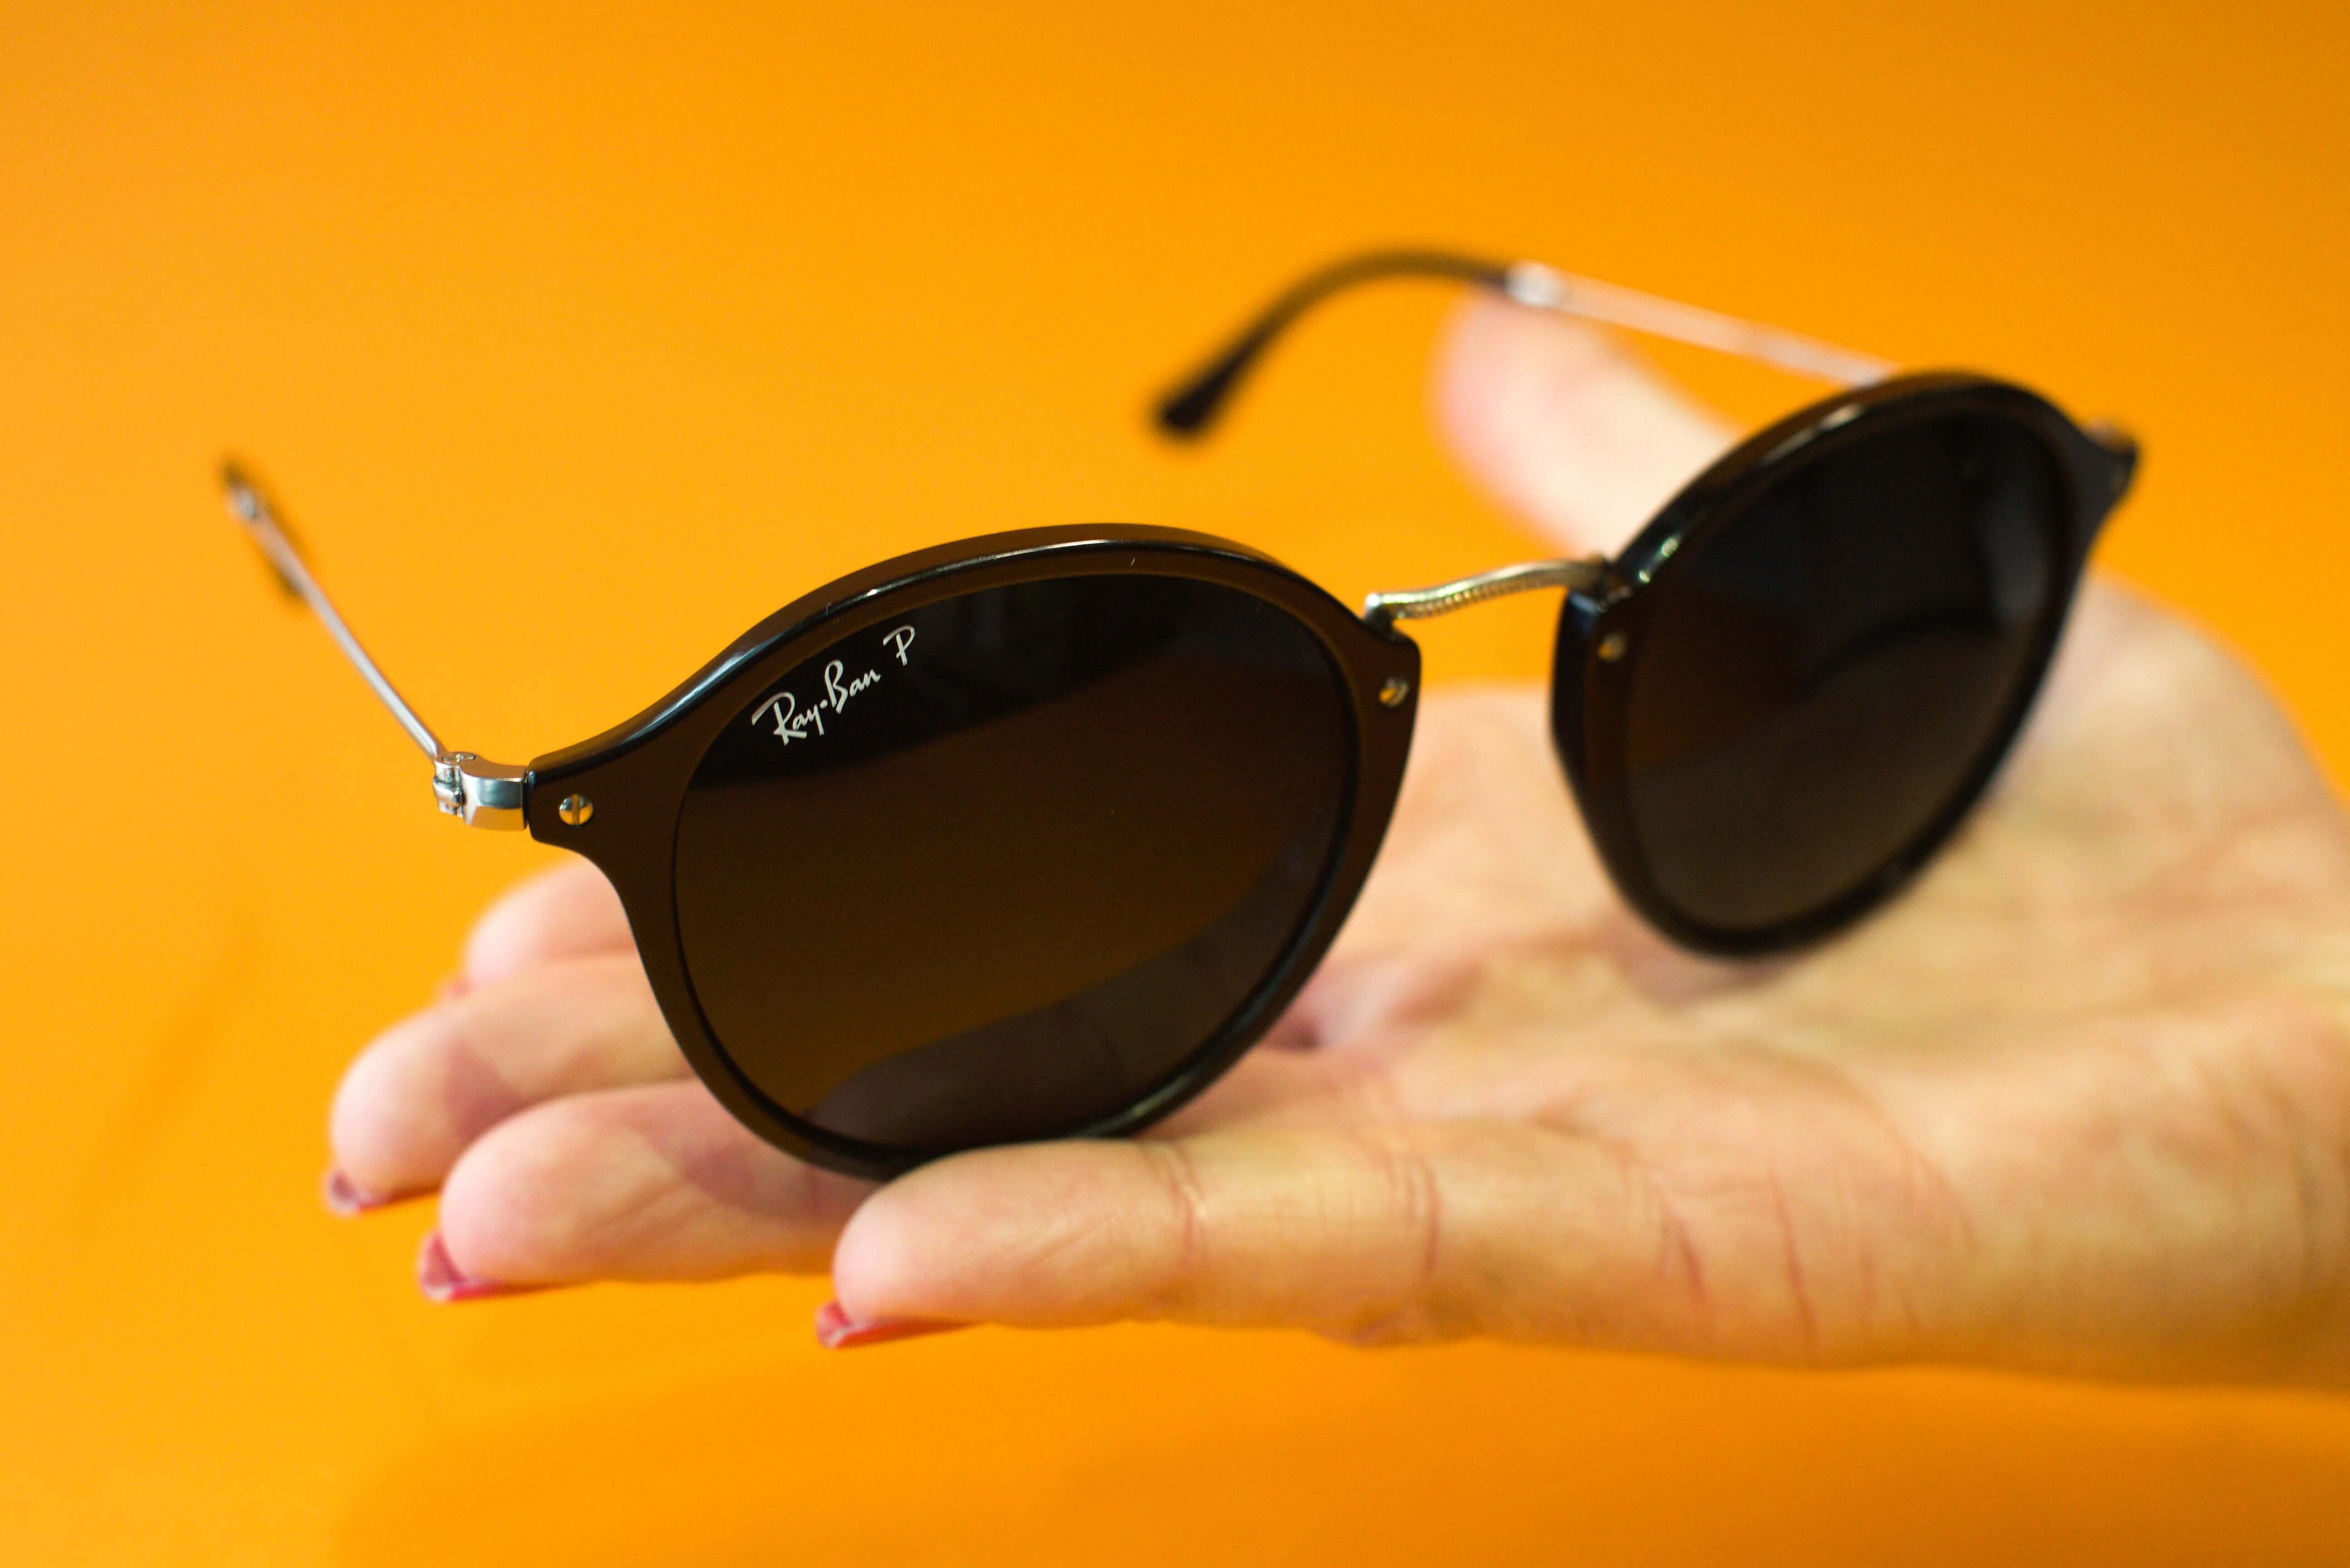 how to spot fake ray ban sunglasses